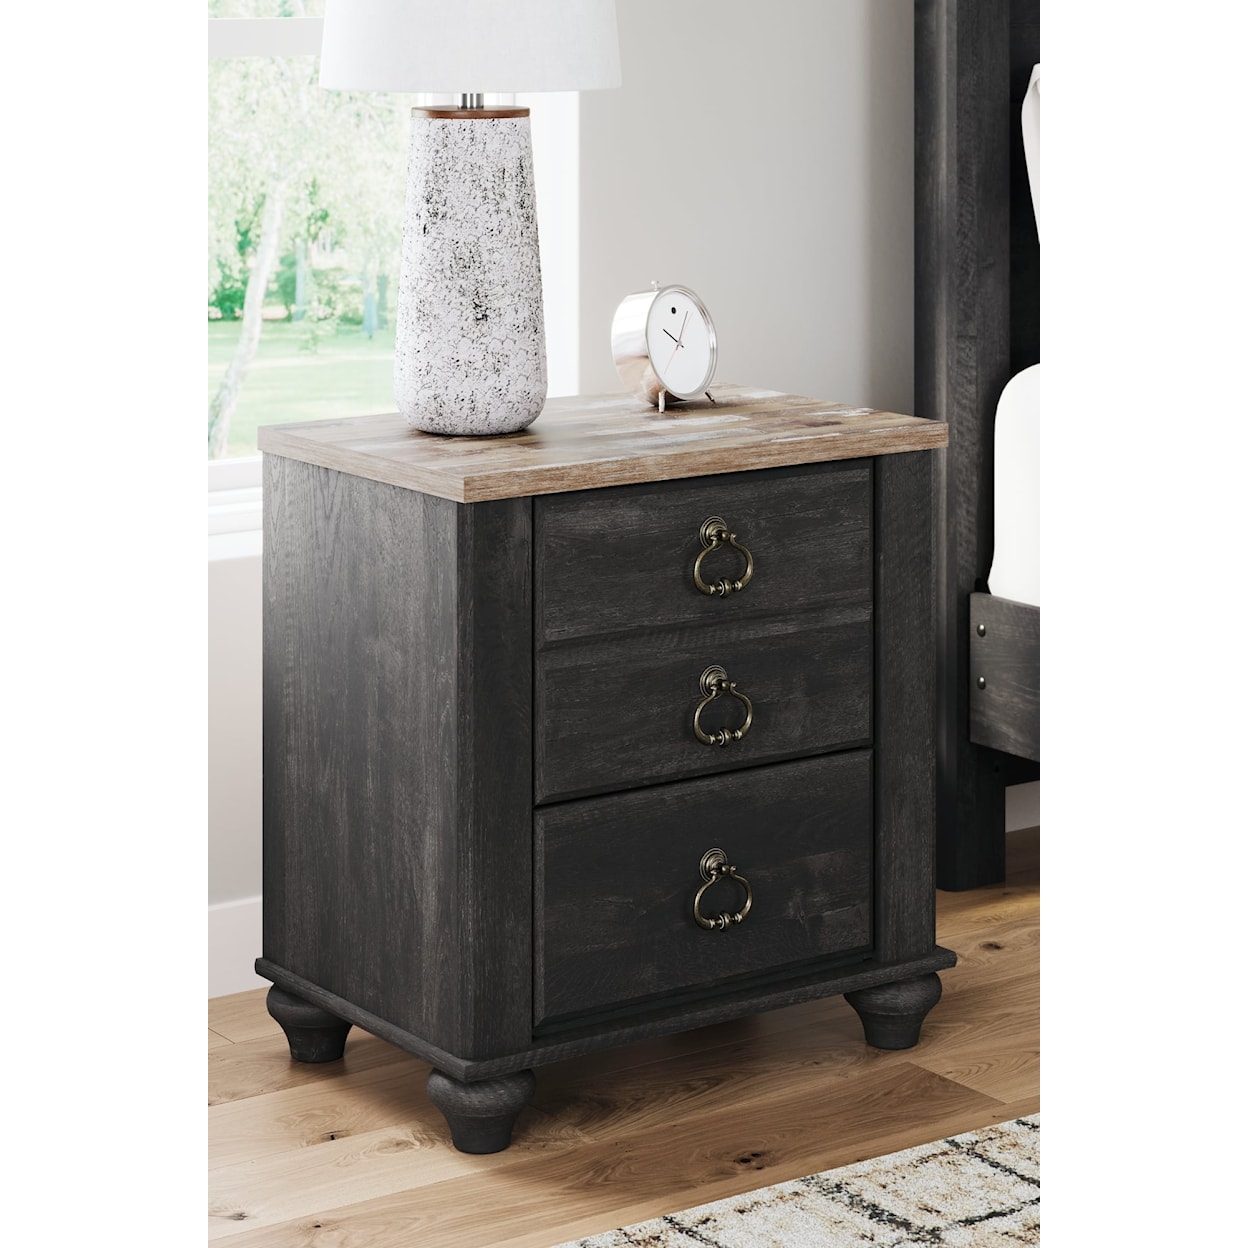 Signature Design by Ashley Furniture Nanforth Nightstand